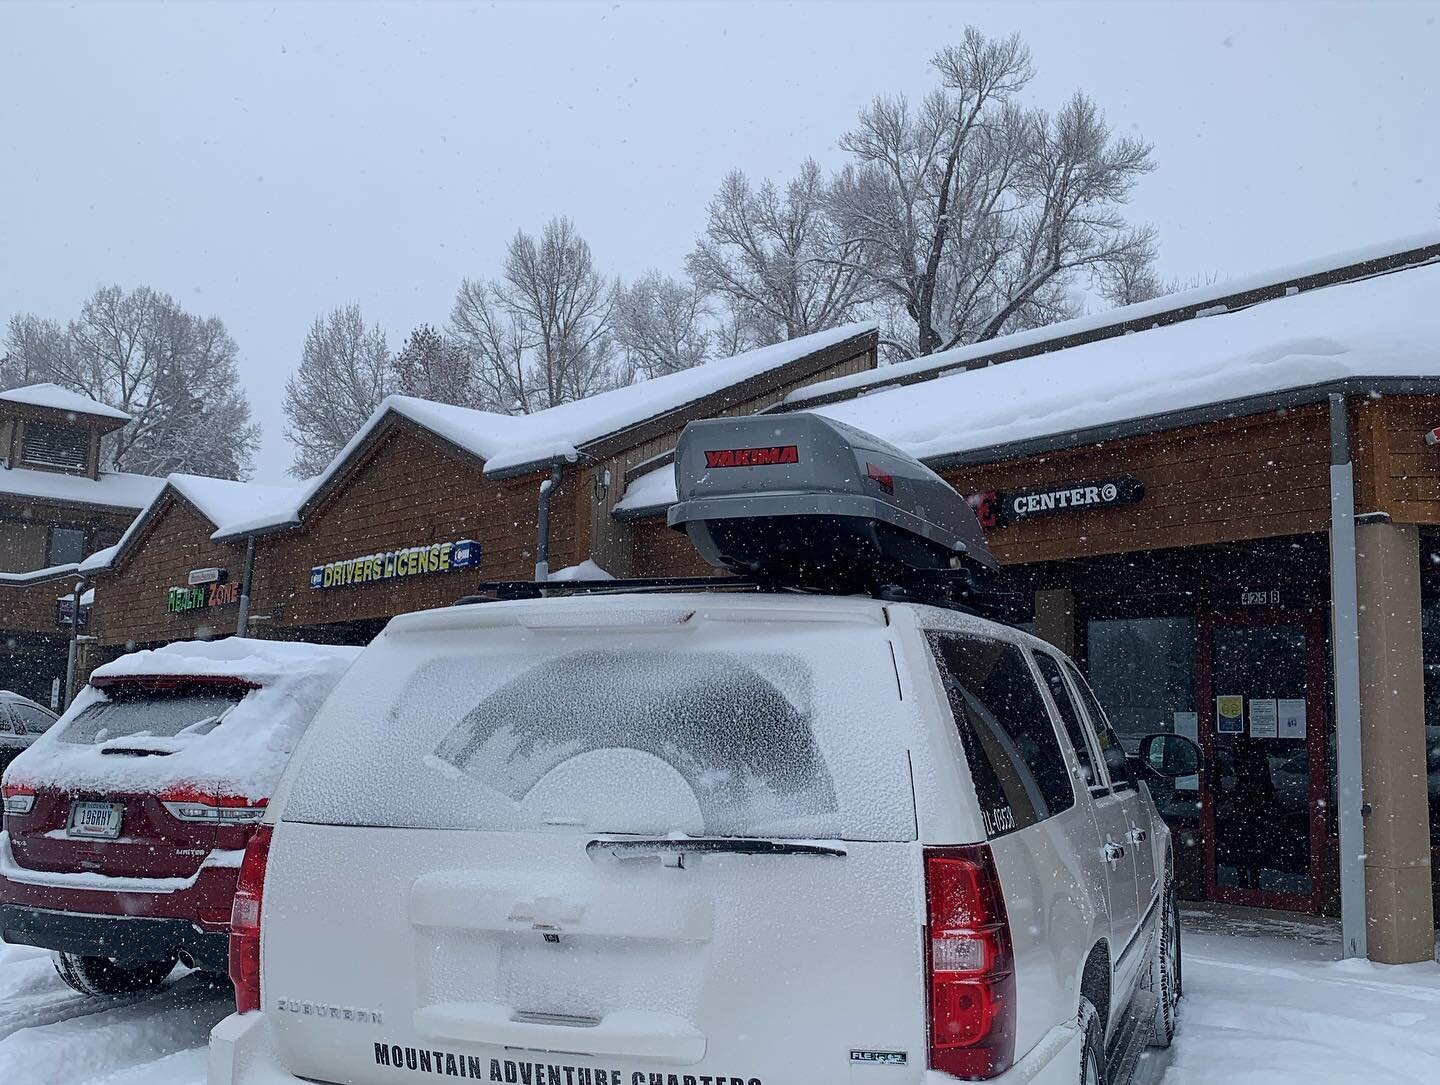 Yesterday was a big day. Off to Steamboat for the morning with a Vail Valley Jet Center pickup in the afternoon. Snowy roads the whole day. The suburban was working hard!! #Snow #powderday #steamboatsprings #vailvalleyjetcenter #vail #beavercreek #va